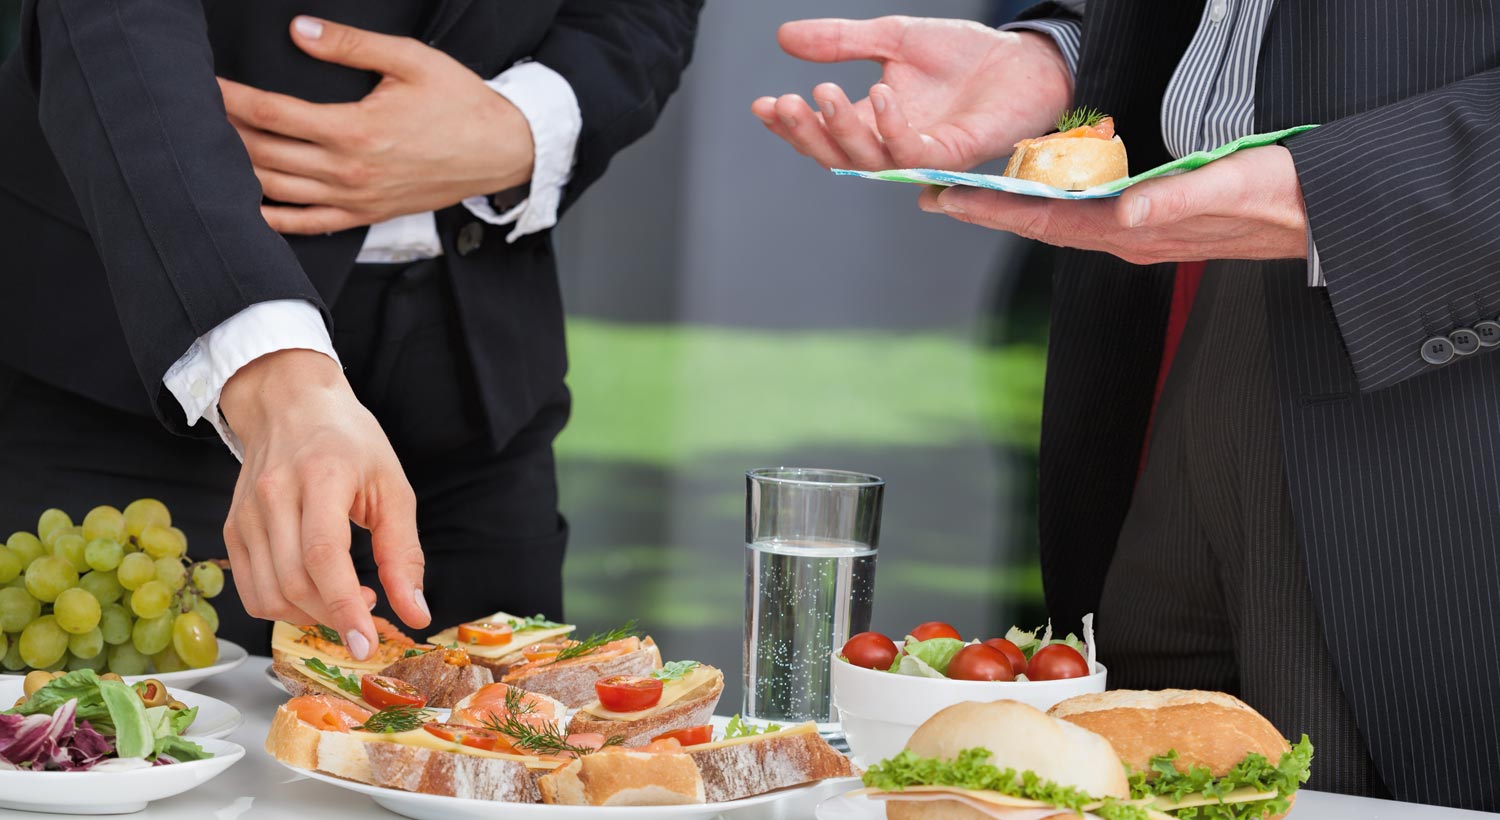 Catering Business 5 Ways to Take Your Catering Business to the Next Level - 80 Pouted Lifestyle Magazine